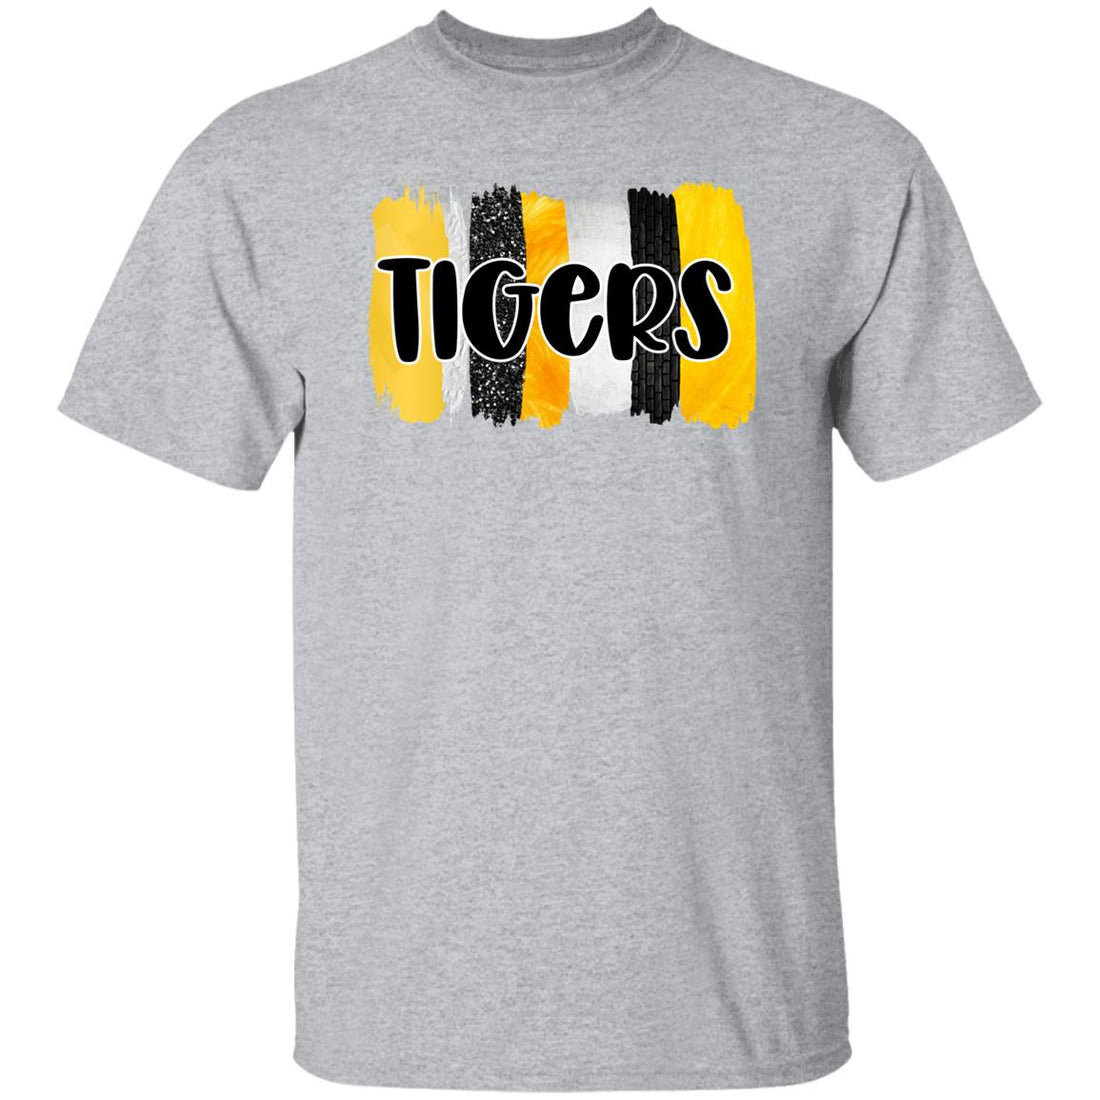 Tigers Paint Swipe T-Shirt - T-Shirts - Positively Sassy - Tigers Paint Swipe T-Shirt